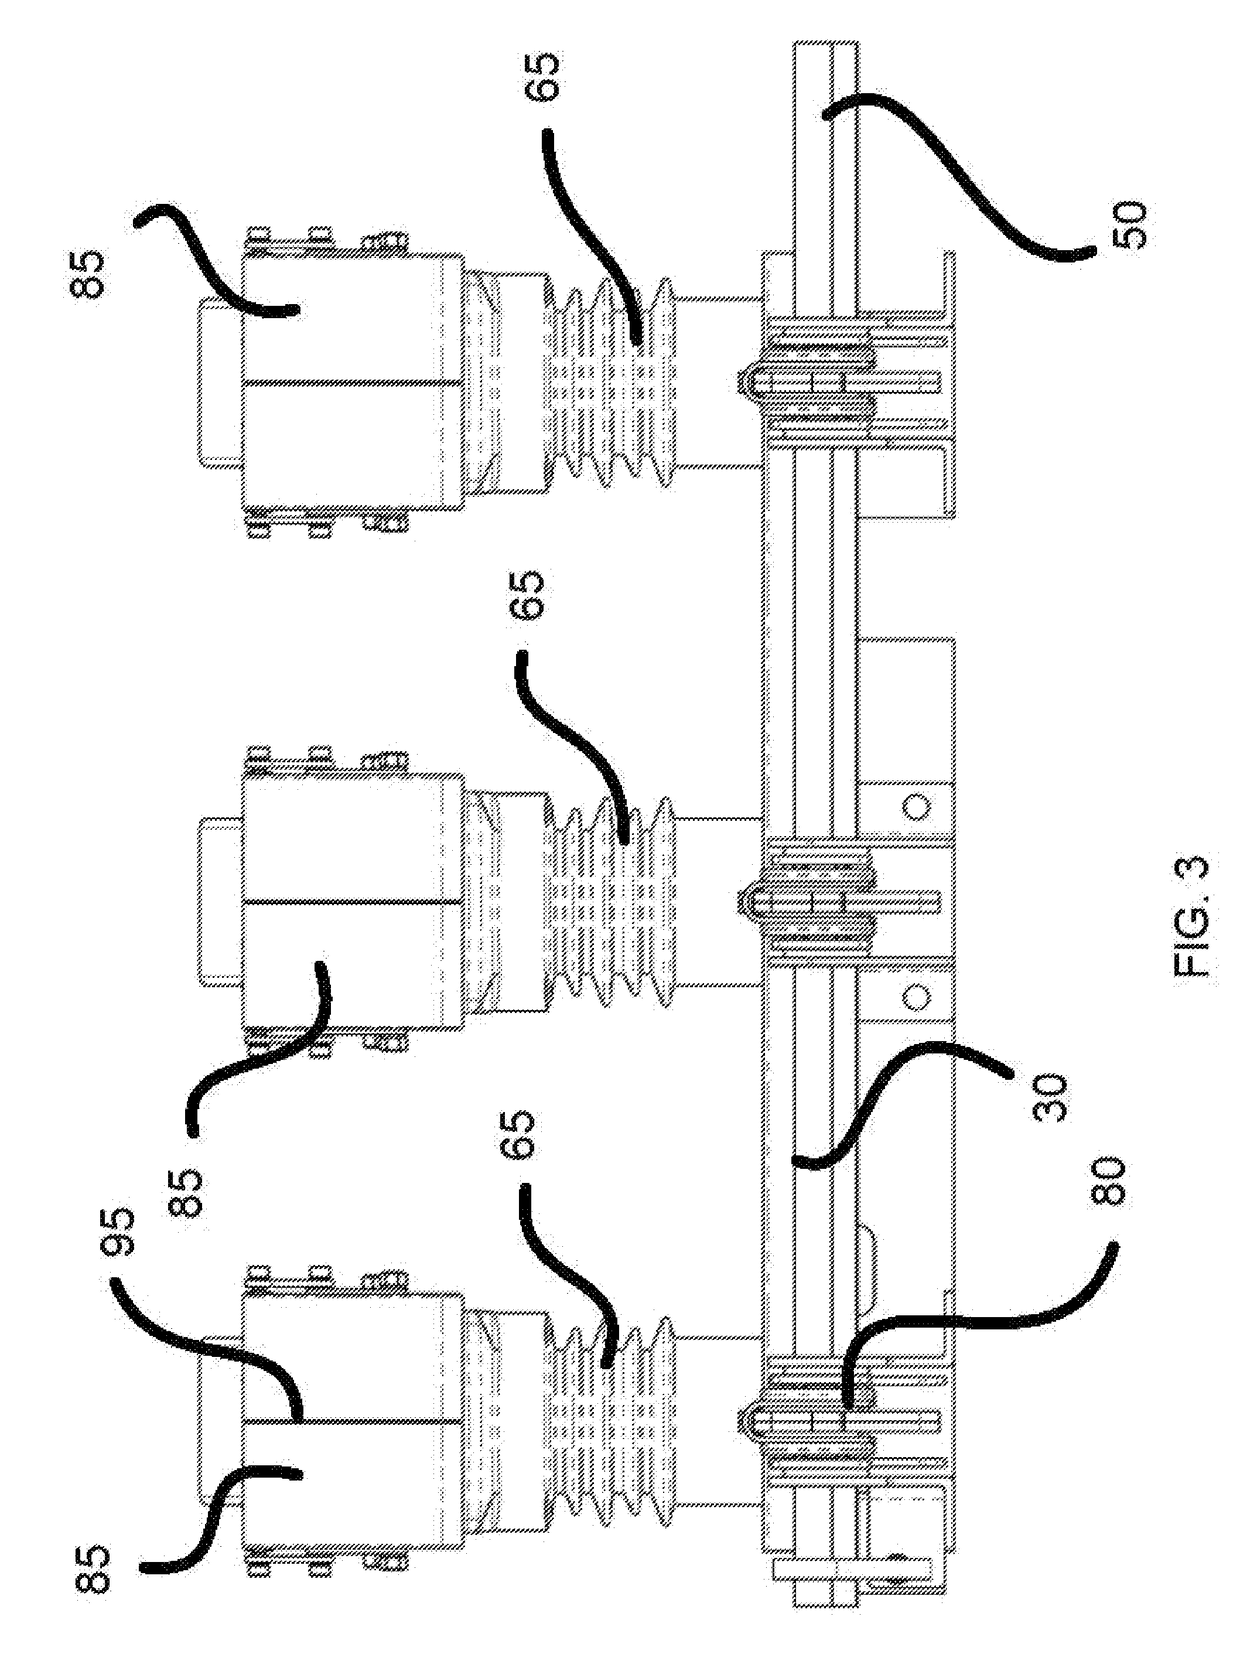 Grounding Switch for Use in Metal-Clad Switchgear